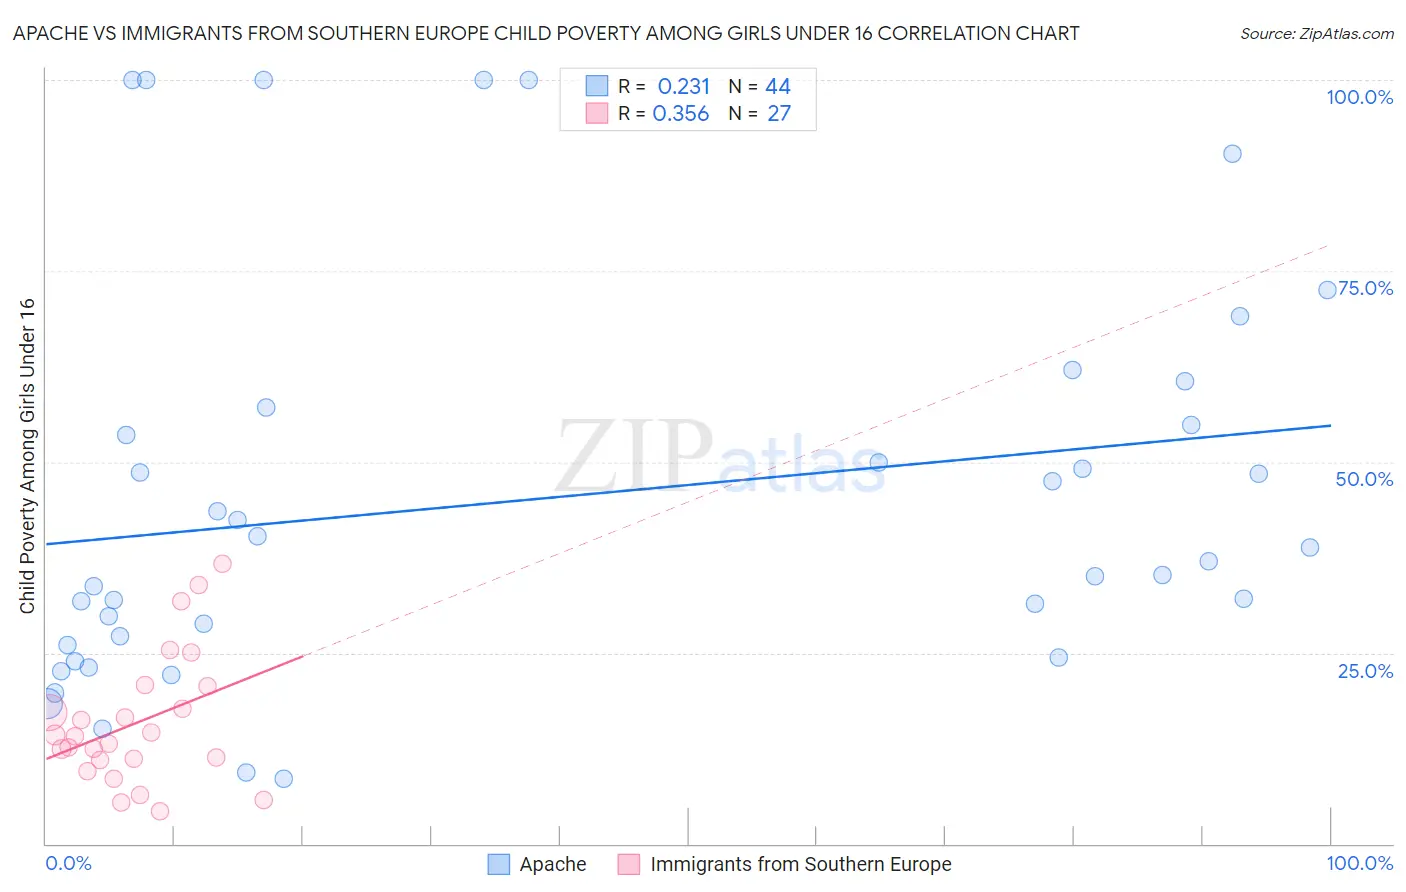 Apache vs Immigrants from Southern Europe Child Poverty Among Girls Under 16